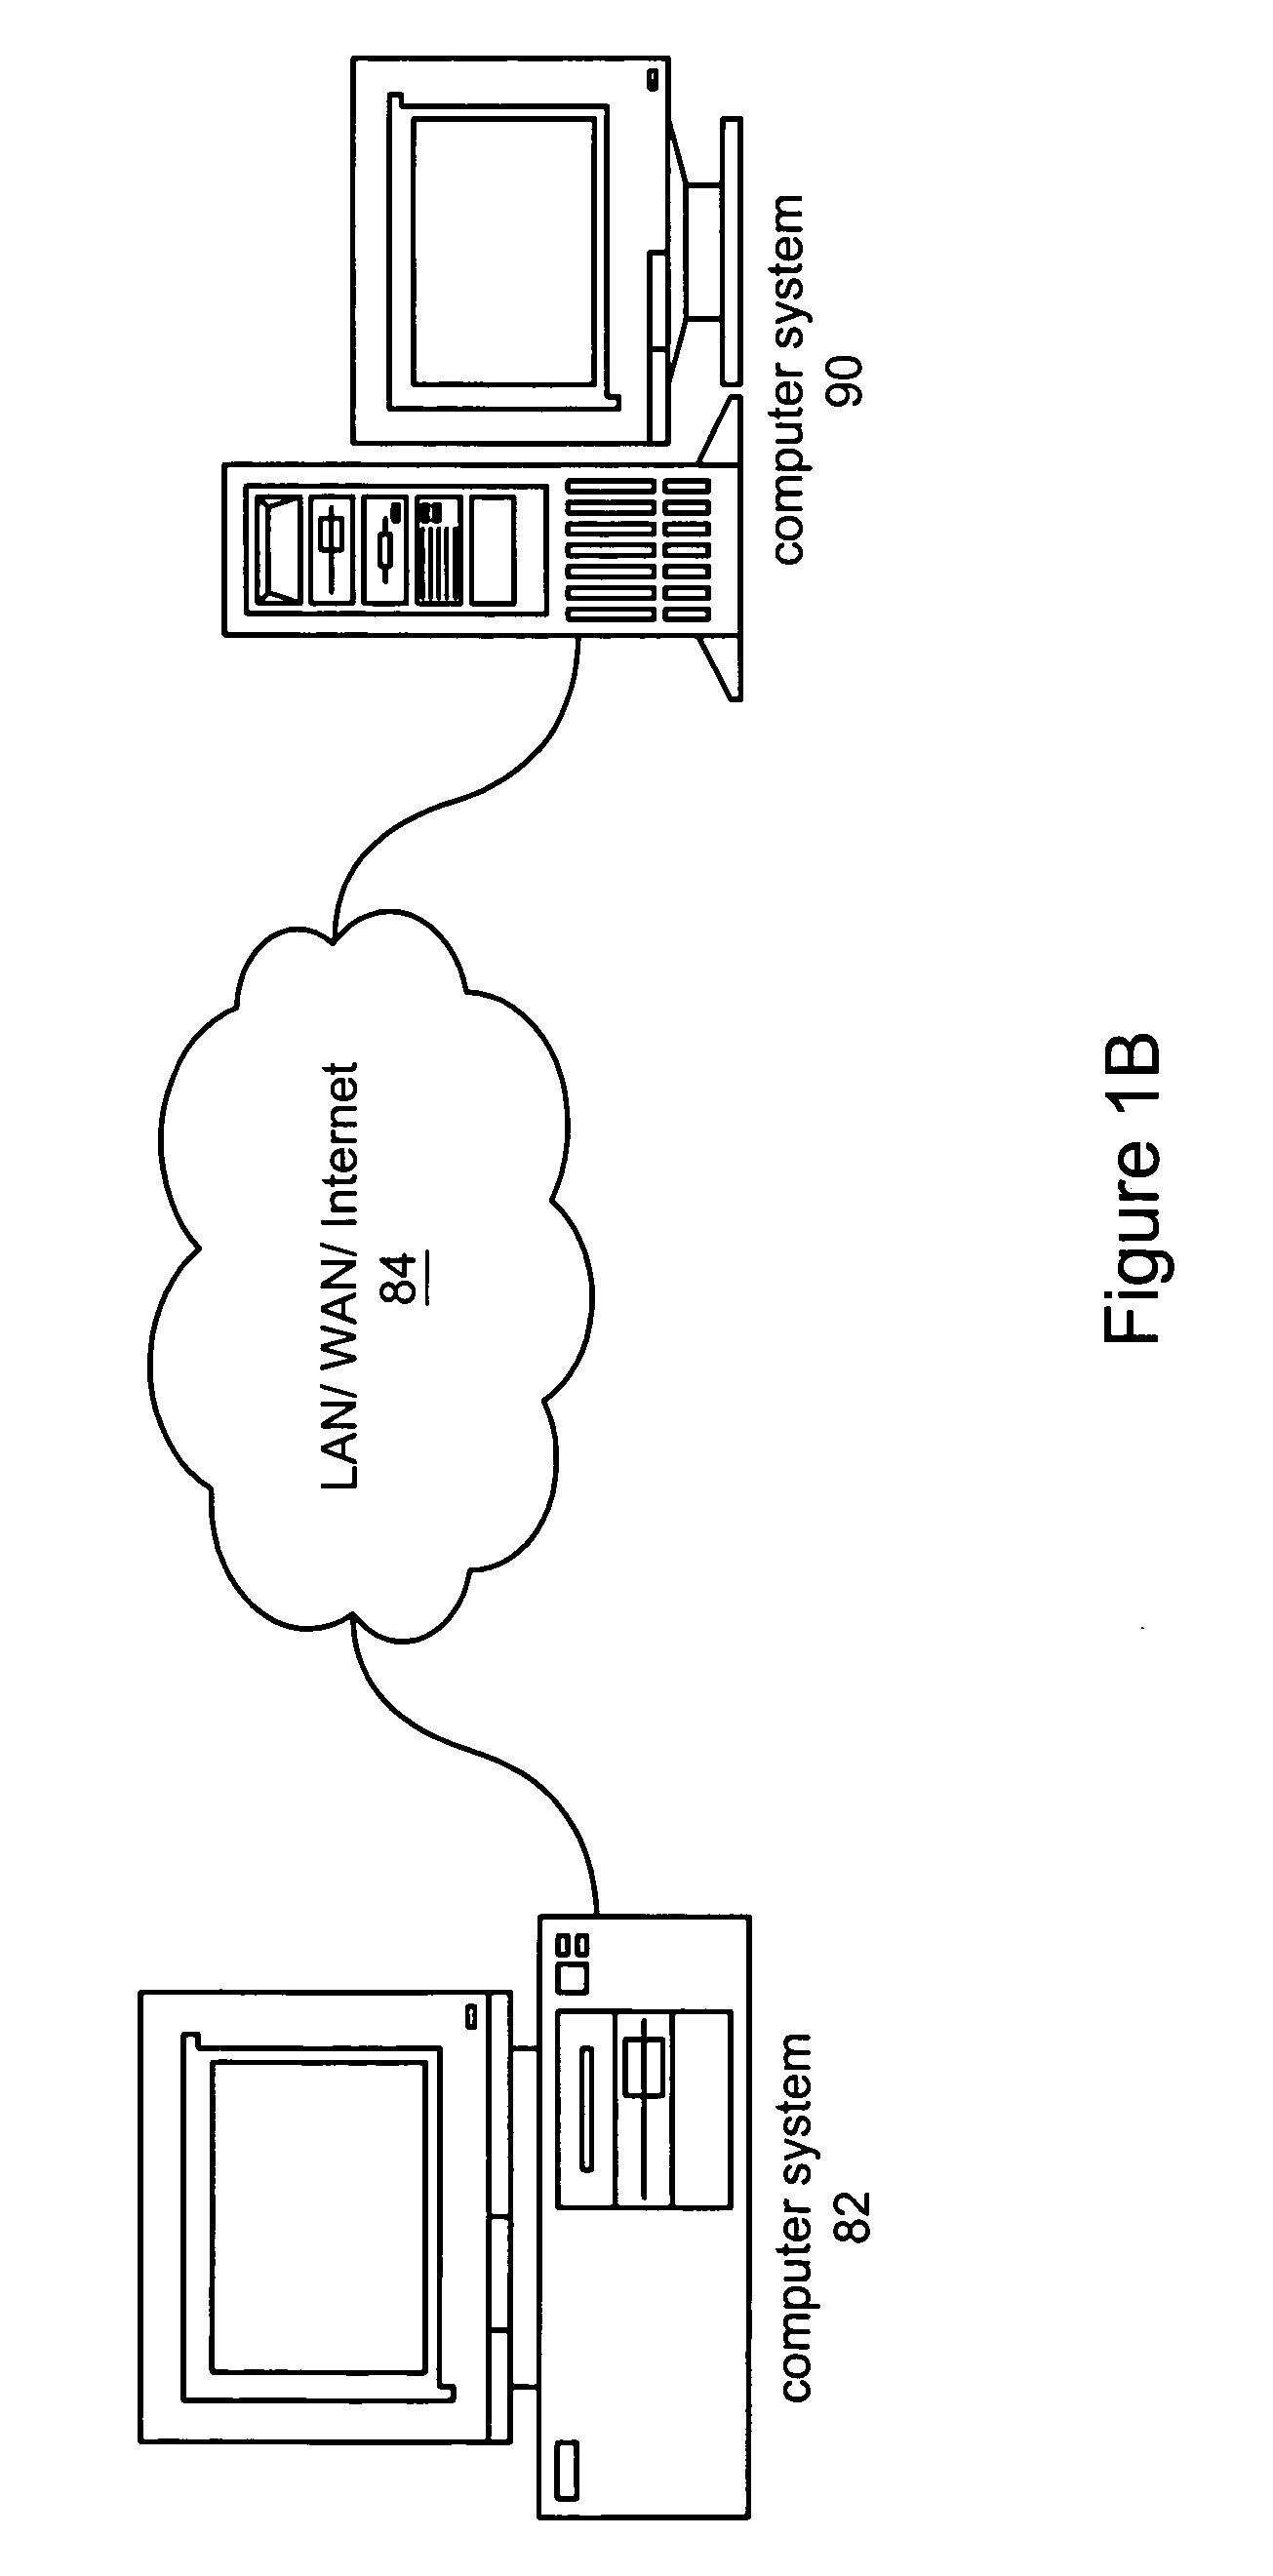 Graphical programming system and method for creating and managing a scene graph